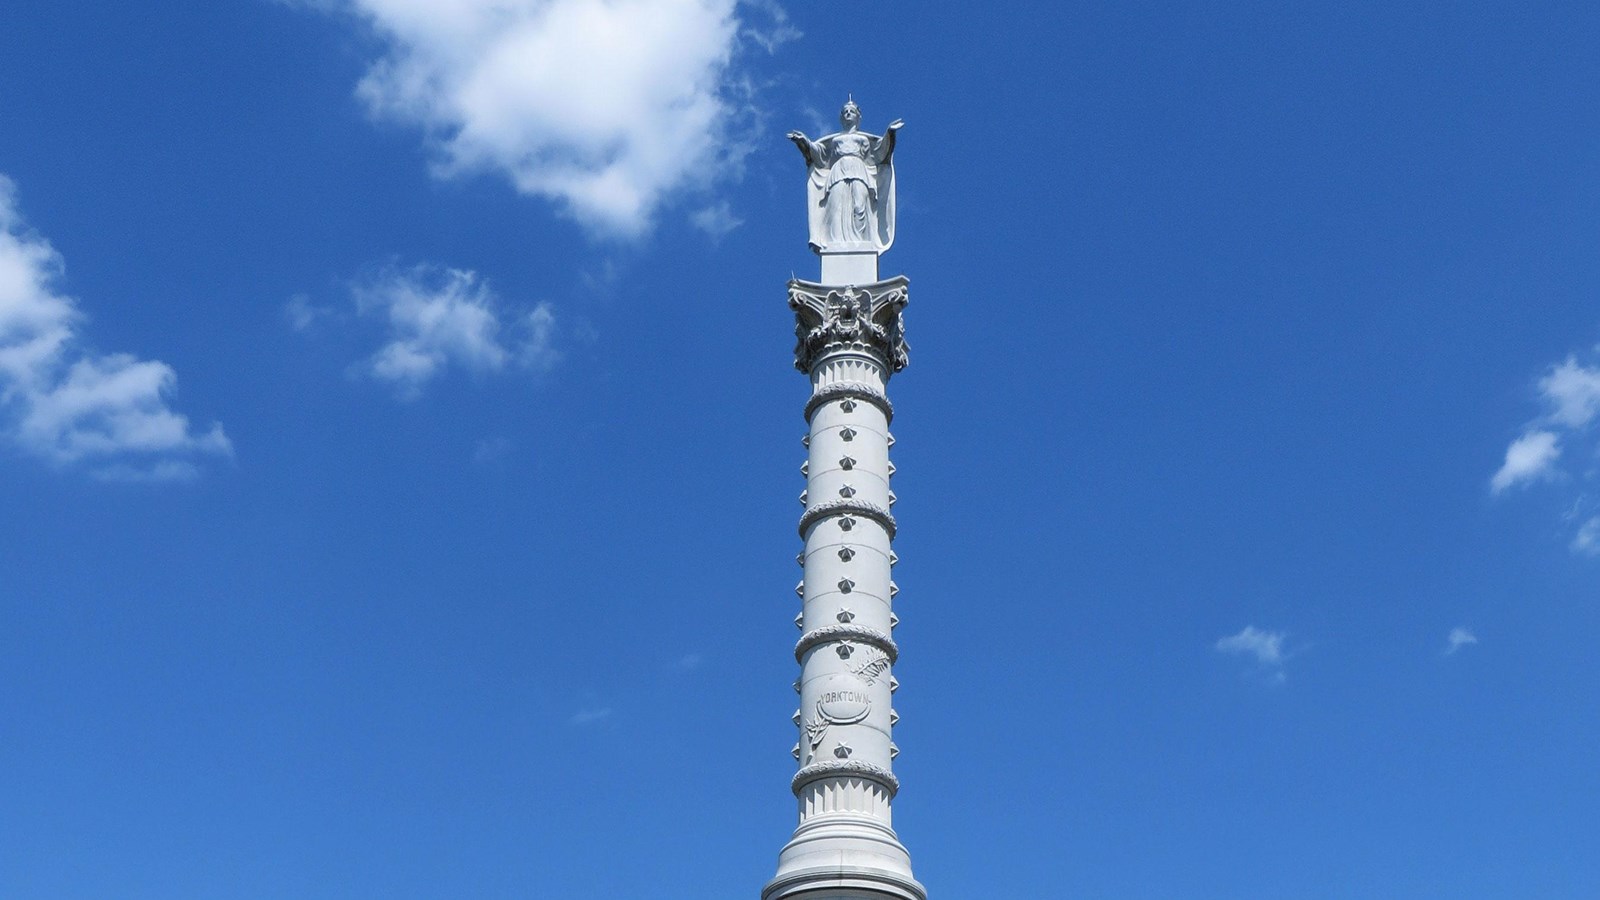 A 100 foot white granite monument with various symbols of the victory and the Lady Liberty on top.